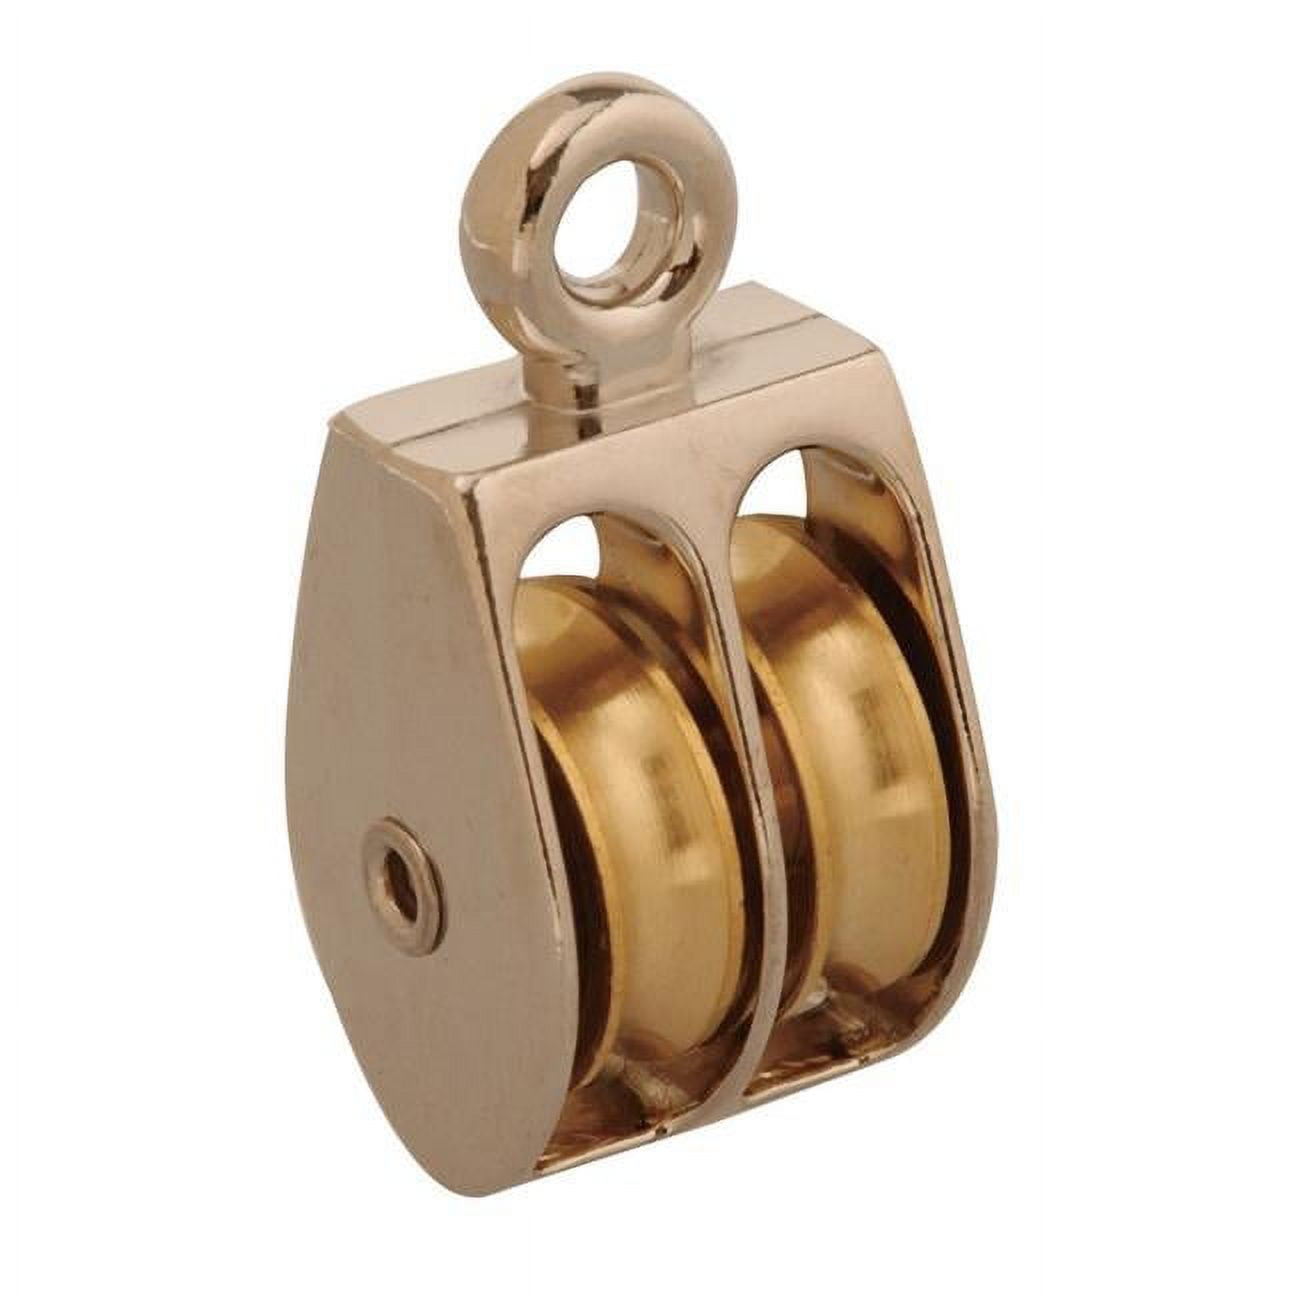 Picture of Campbell 5307939 0.75 in. Dia Copper Double Sheave Rigid Eye Pulley, Pack of 10